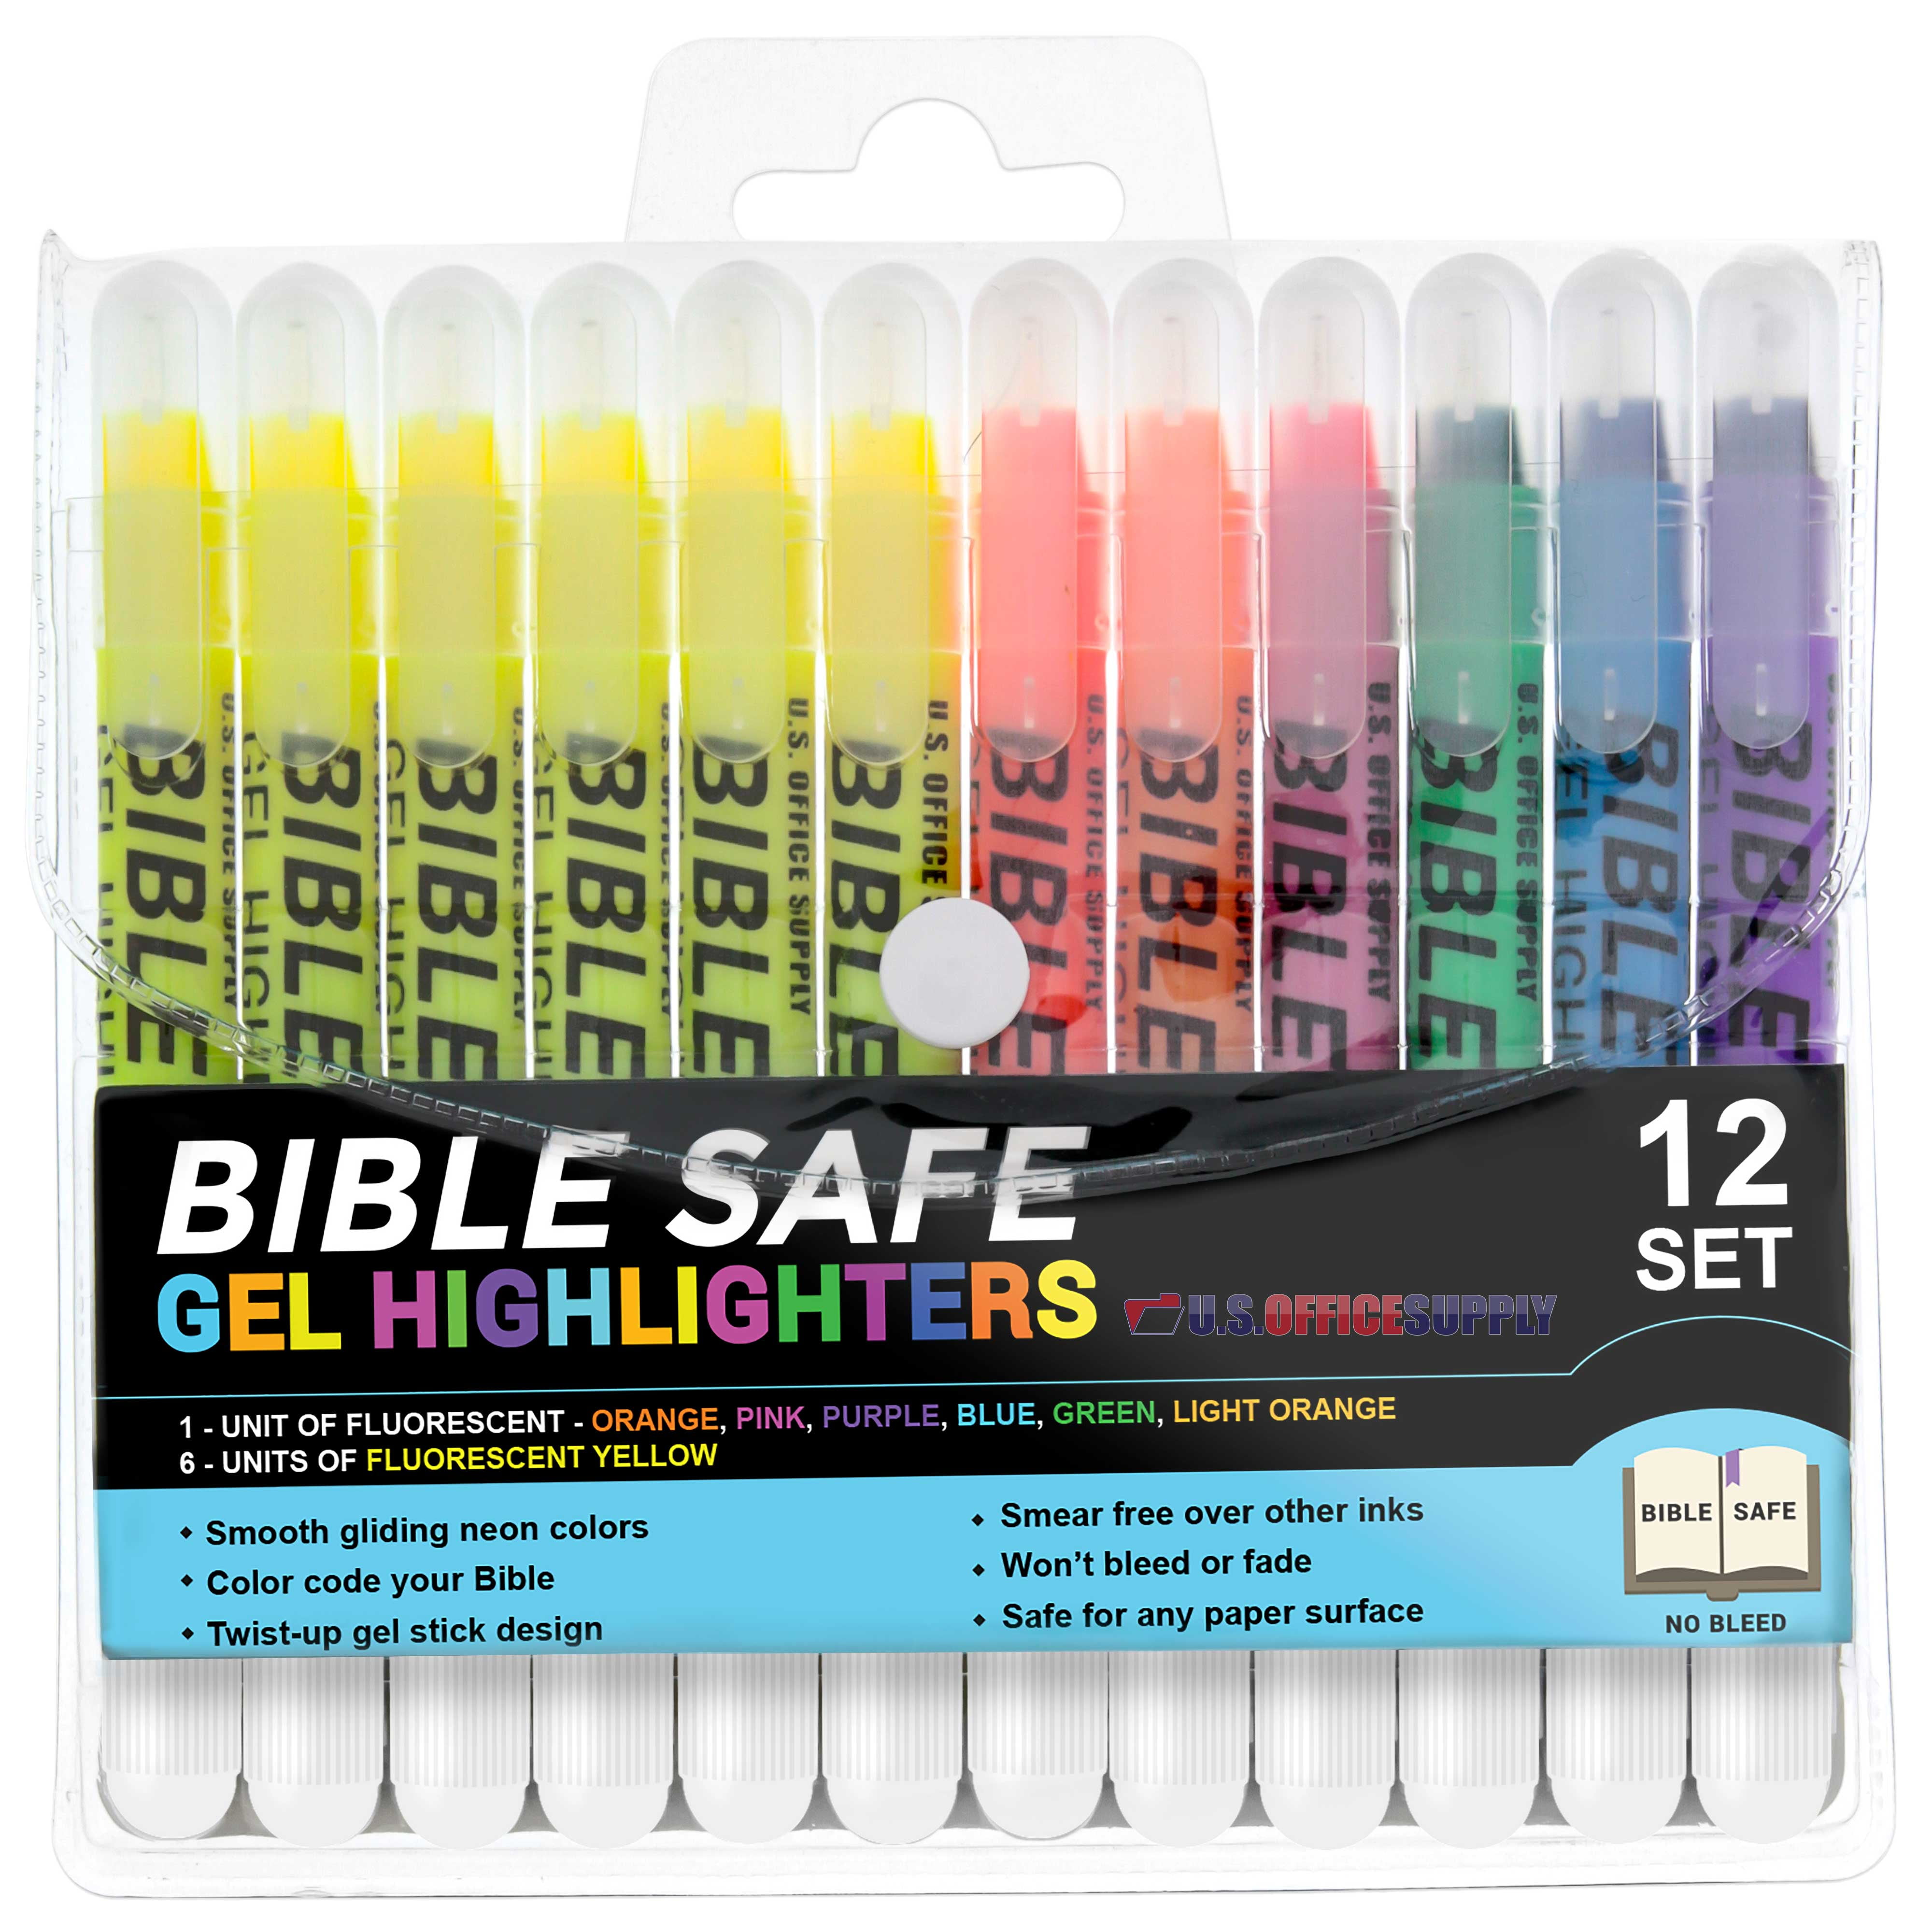  DazSpirit 8 Earthy No Bleed Bible Gel Highlighters and 5 Pens  with 90 Laminated Bible Tabs, Aesthetic Bible Journaling School Supplies  Christian Gifts for Women & Men (73 Pre-Printed 